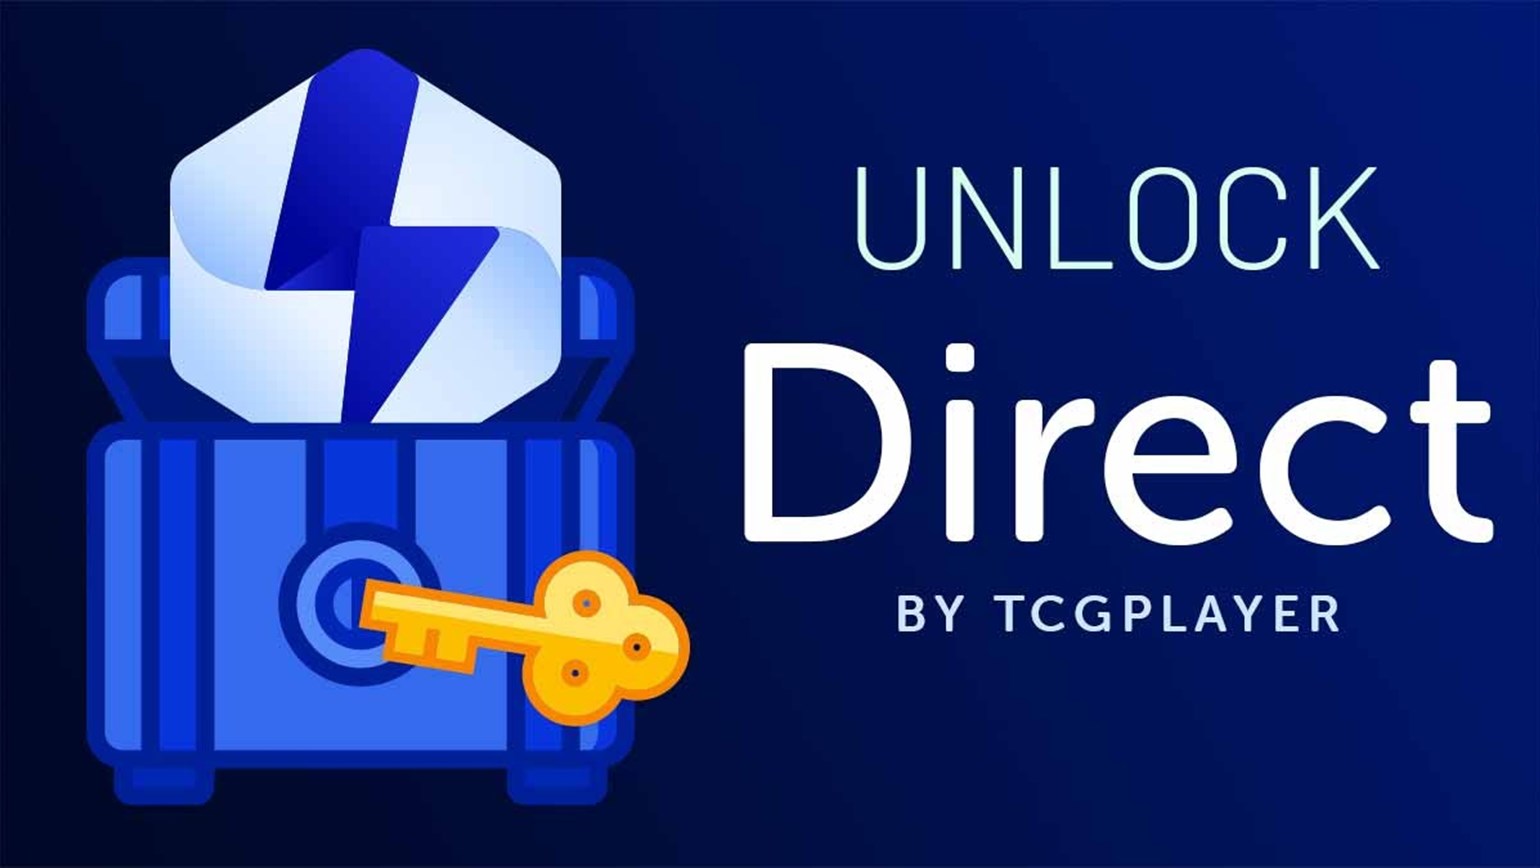 Unlock Direct by TCGplayer